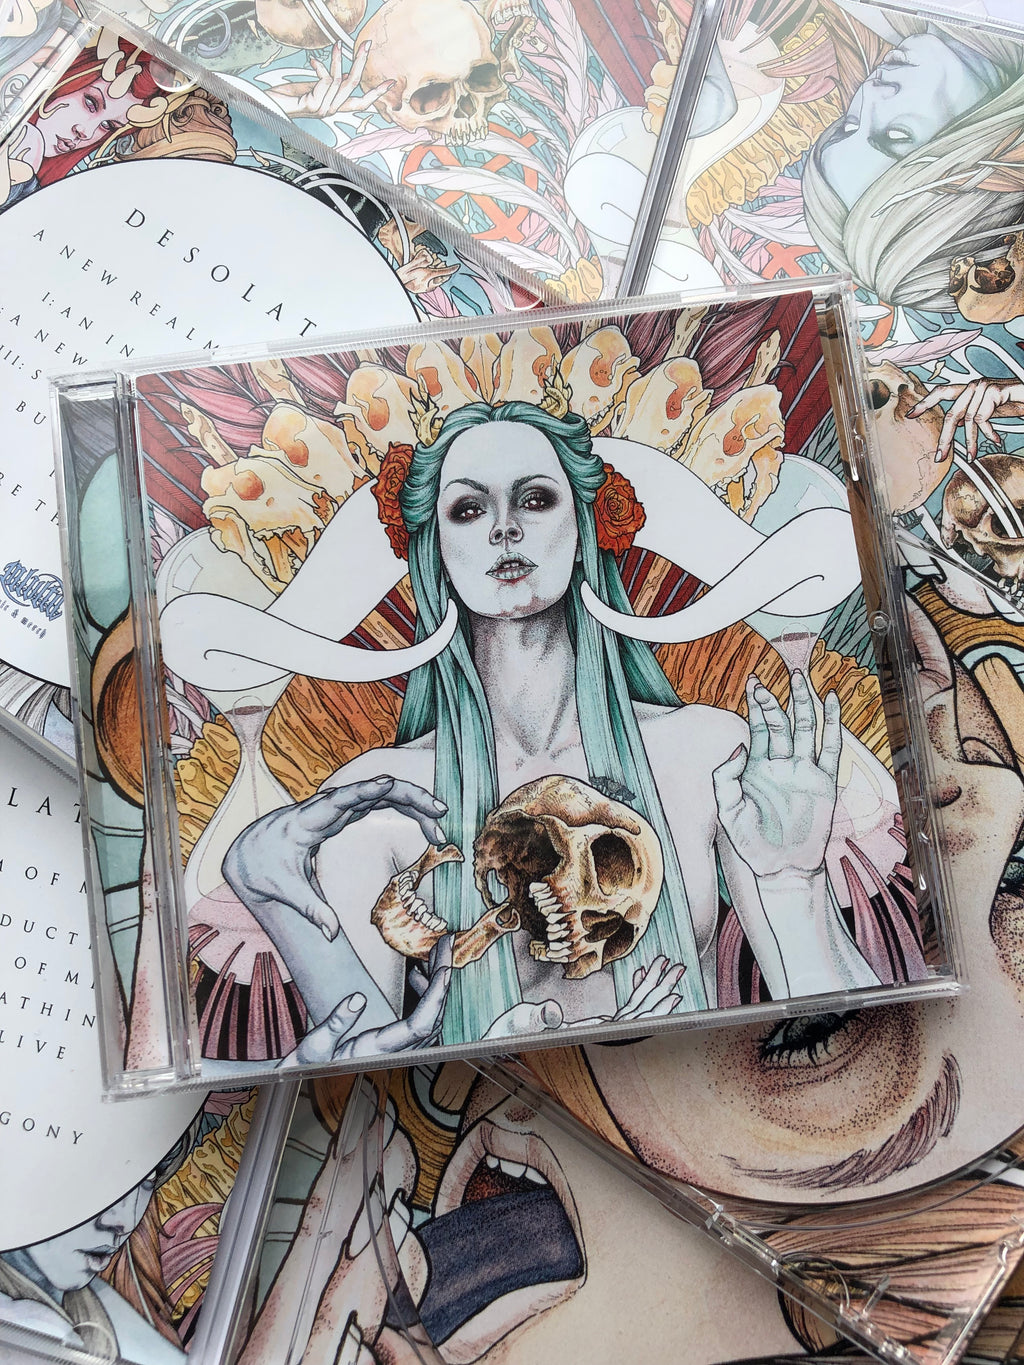 Desolated - A New Realm Of Misery CD